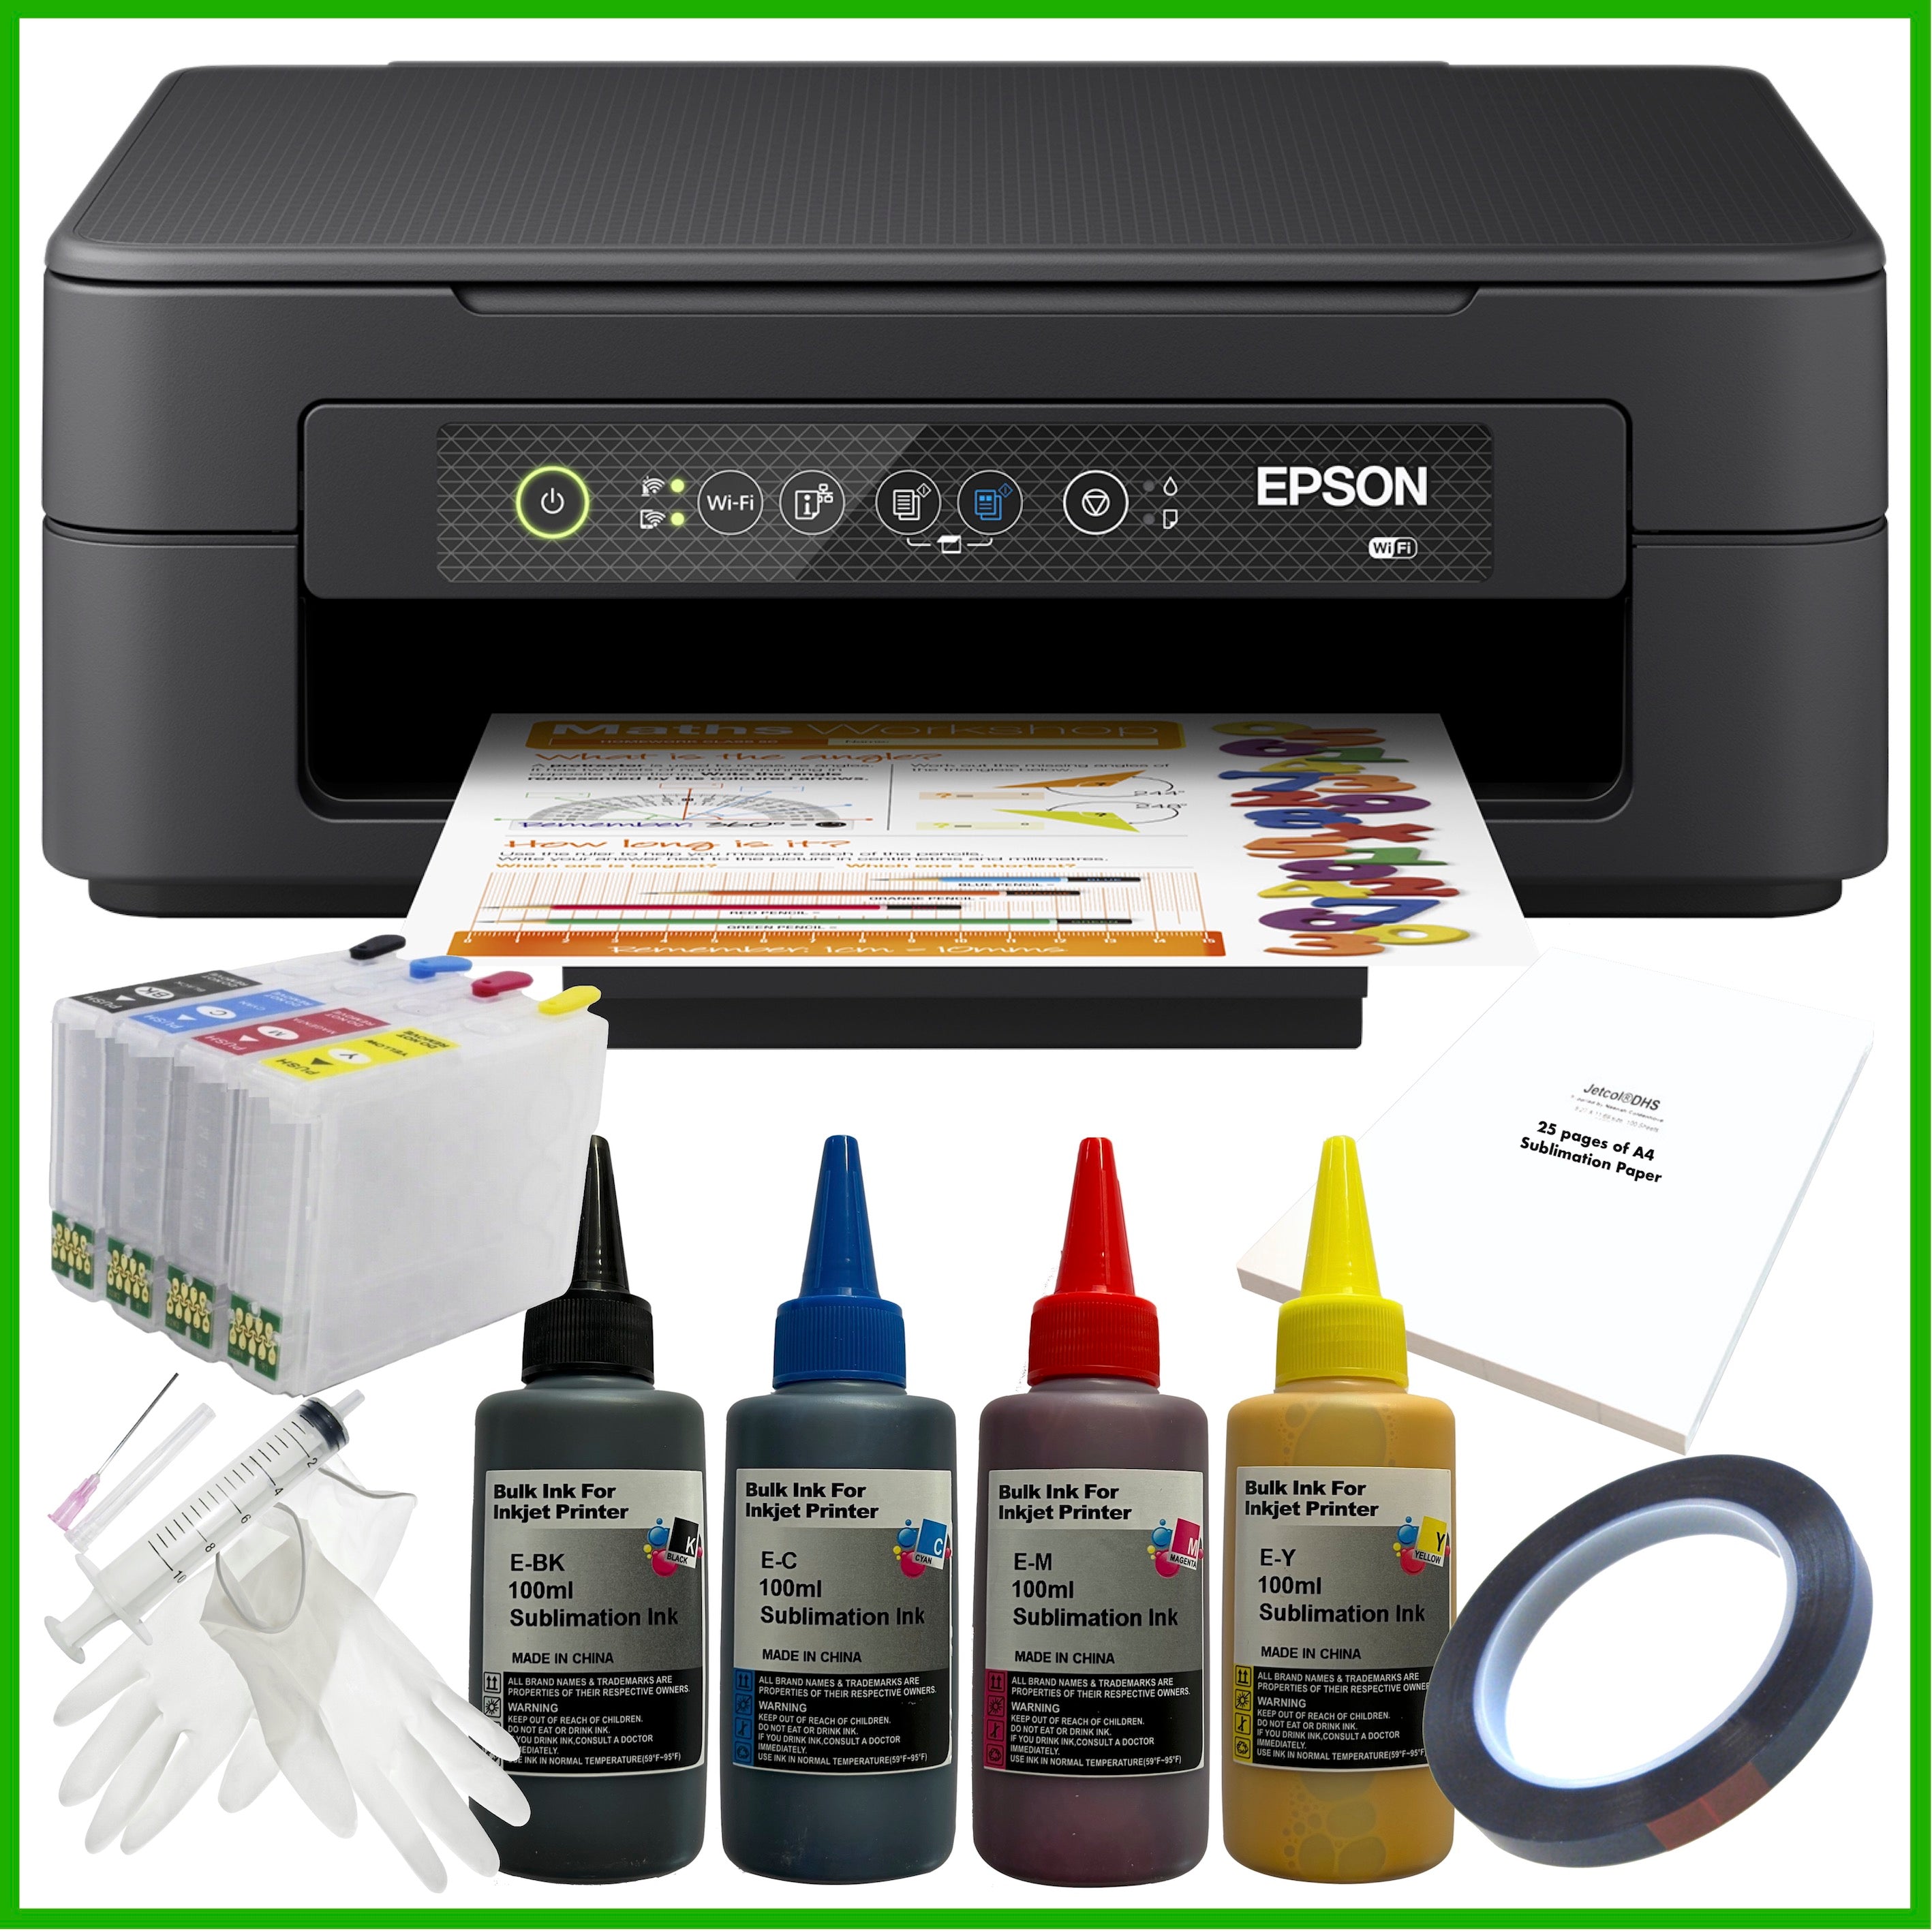 Expression XP-2200, Consumer, Inkjet Printers, Printers, Products